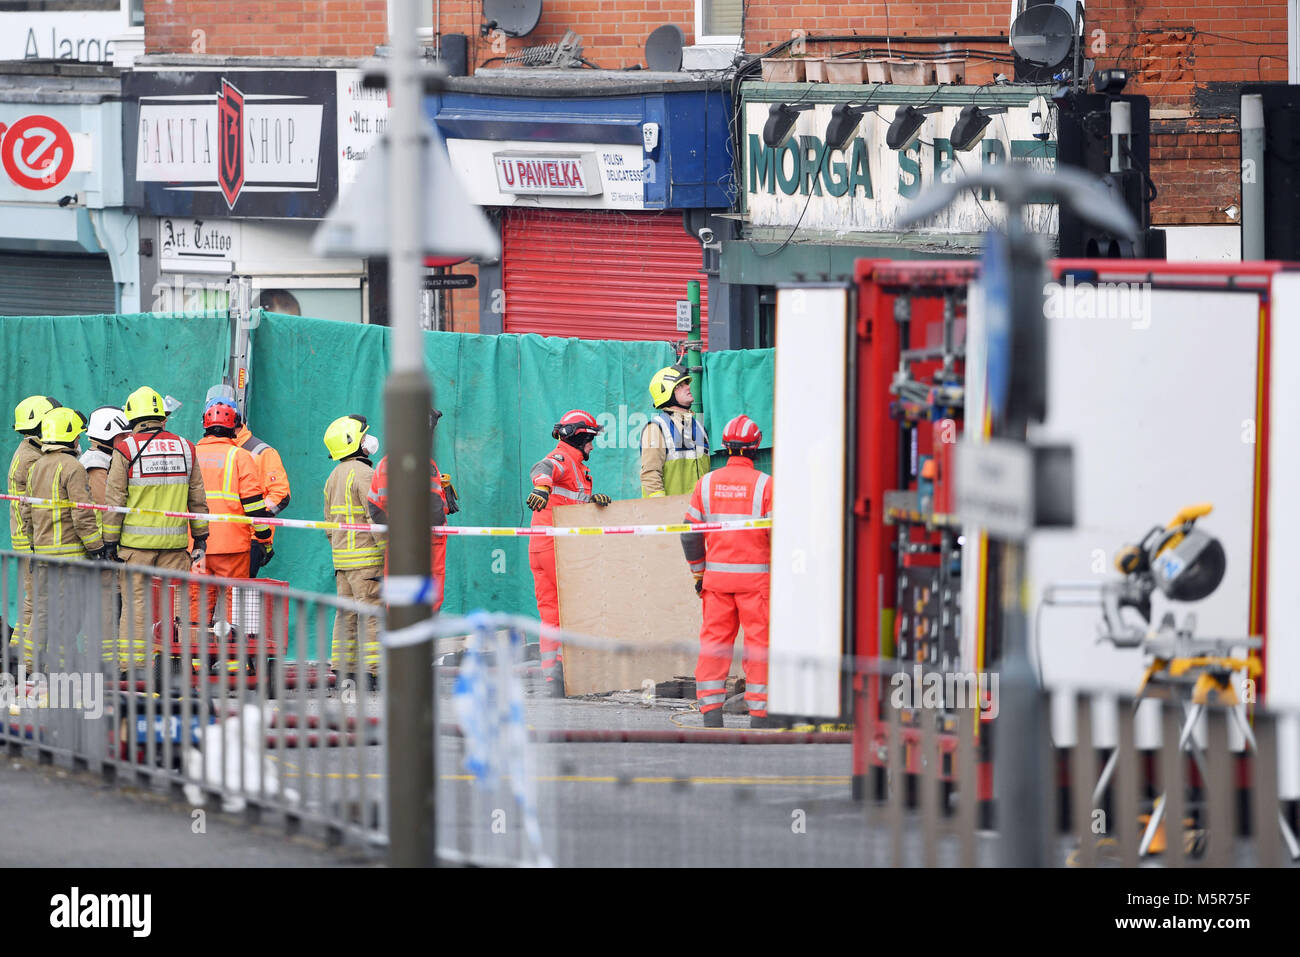 Emergency personnel continue to work at the scene on Hinckley Road in Leicester, as four people were killed, after a suspected explosion and subsequent fire destroyed a shop. Stock Photo